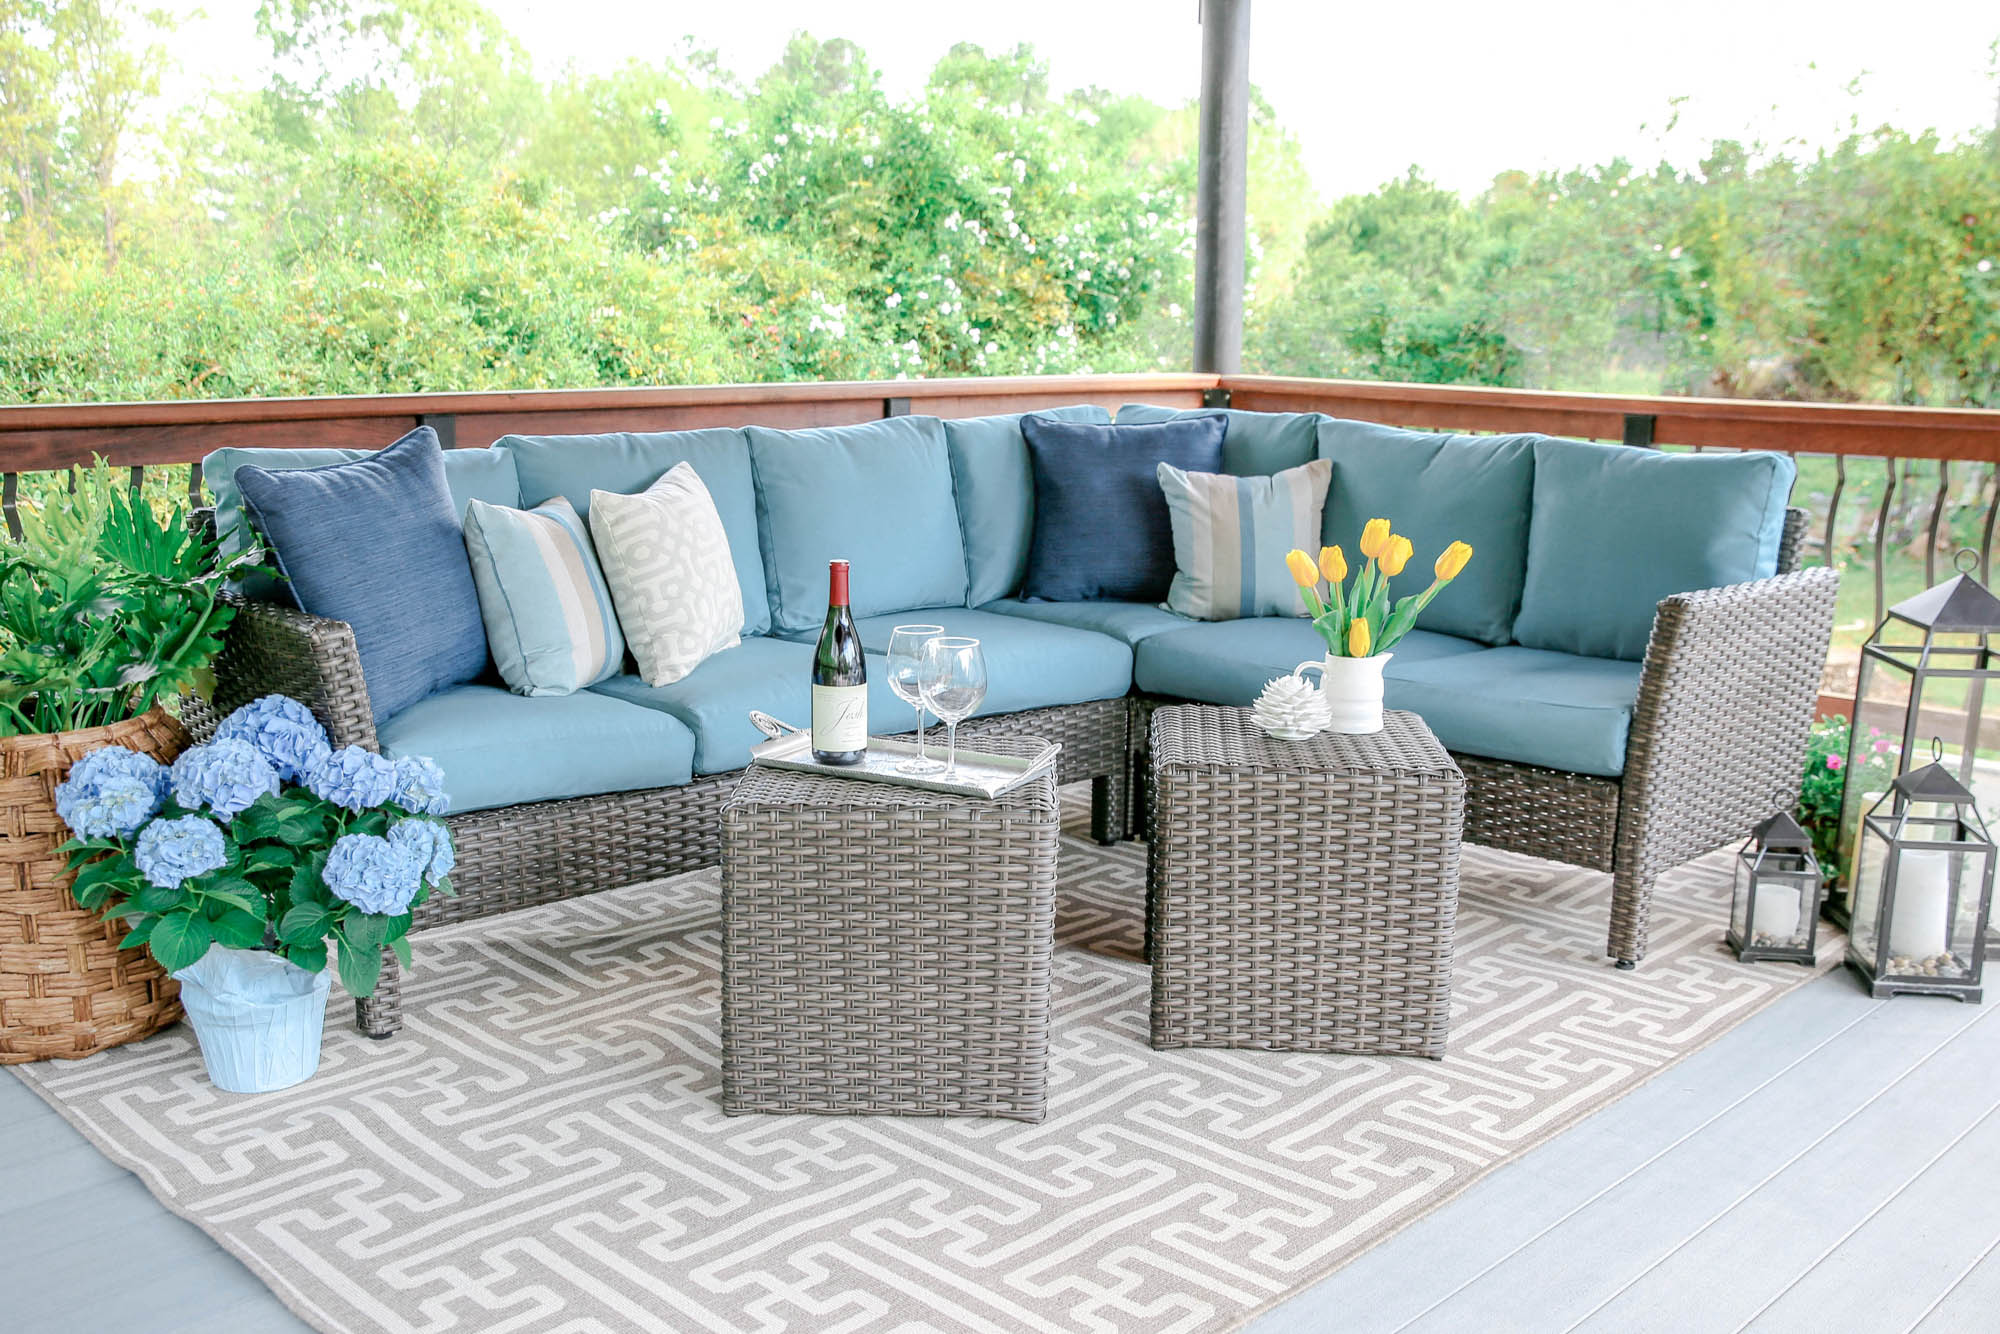 Should You Buy Low-End or High End Quality Patio Furniture? – Sunniland